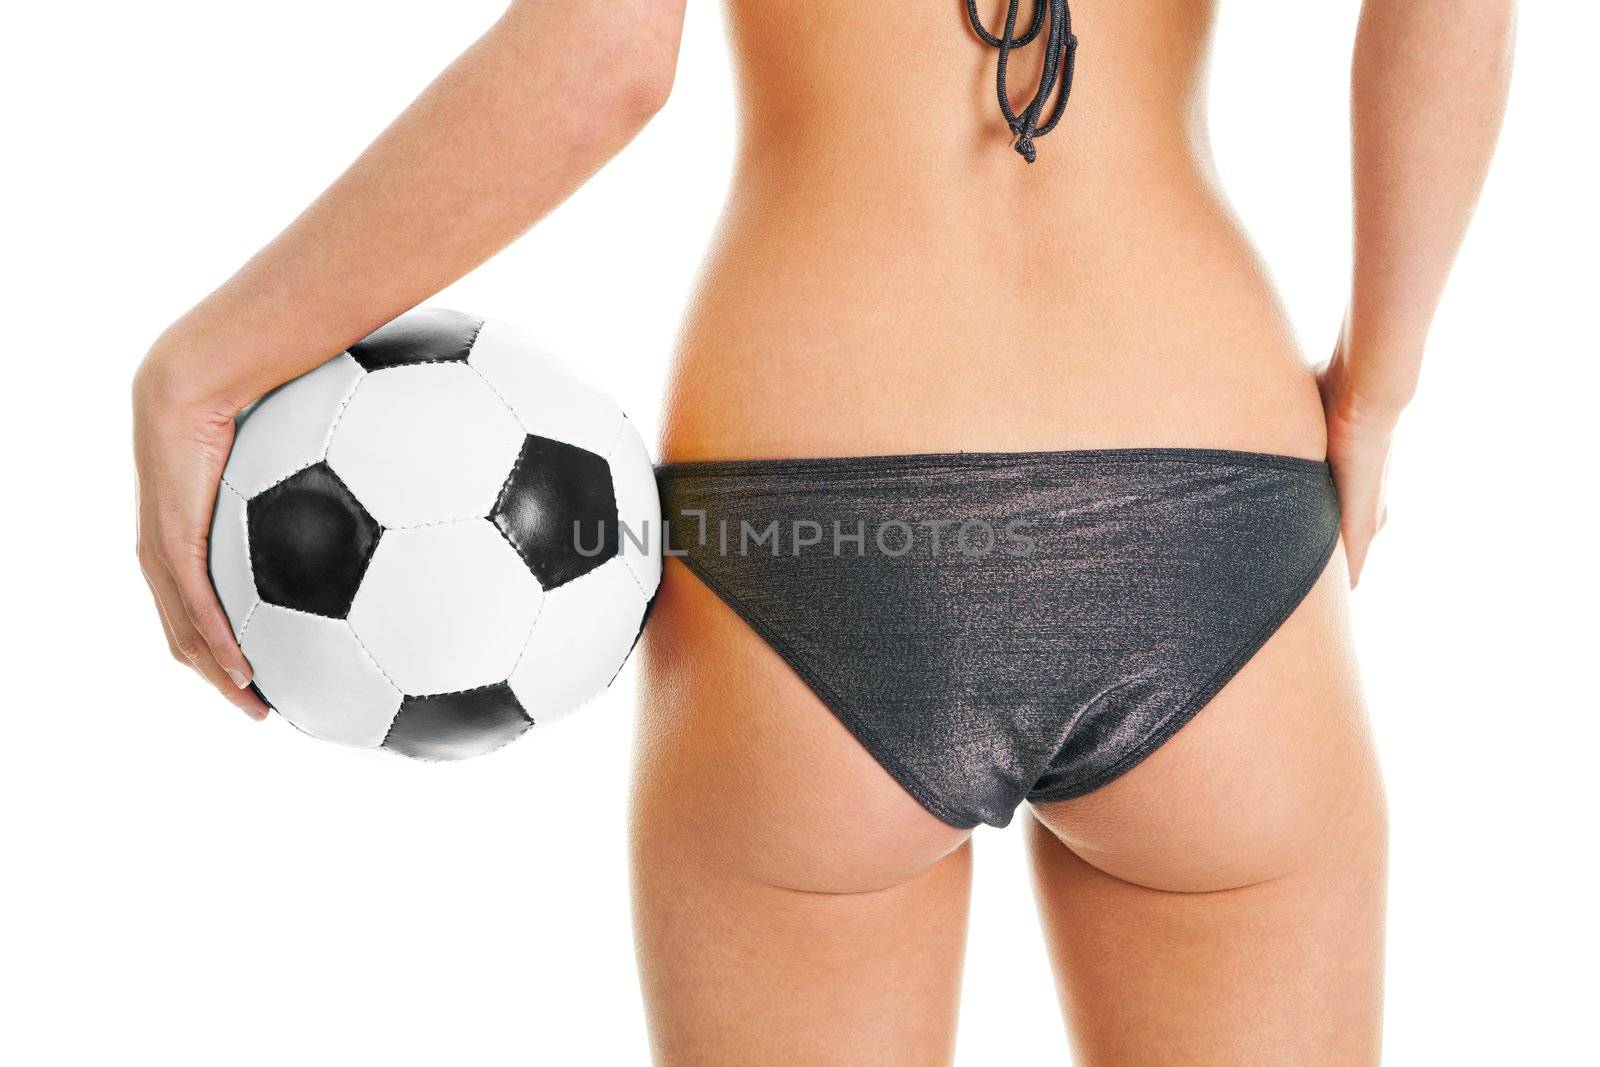 Beautilful woman in bikini posing with soccer ball by AndreyPopov